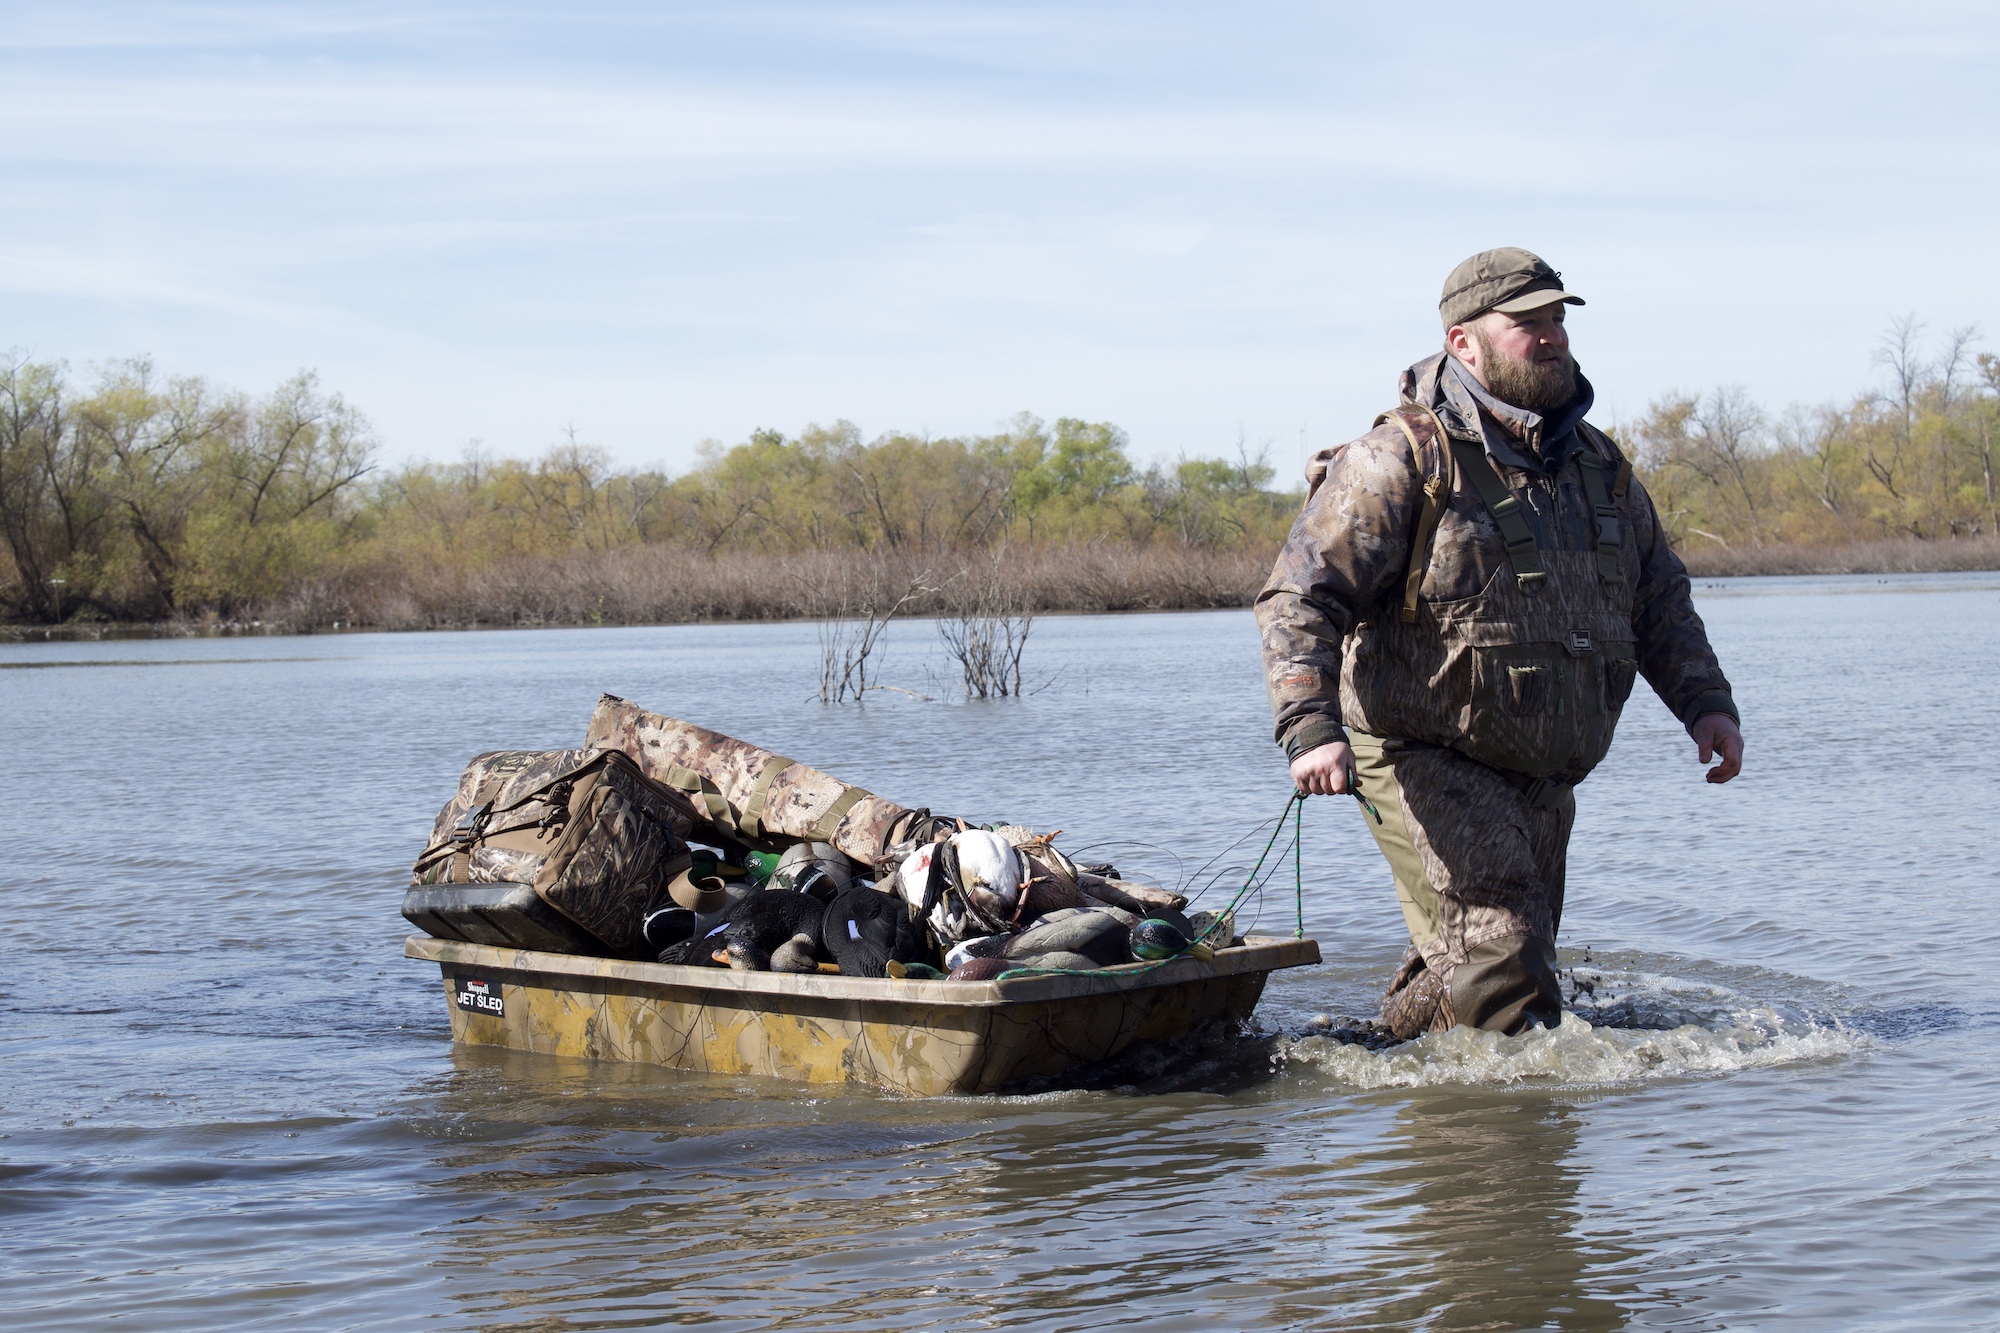 A man wearing one of the best waders for duck hunting dragging gear through the water